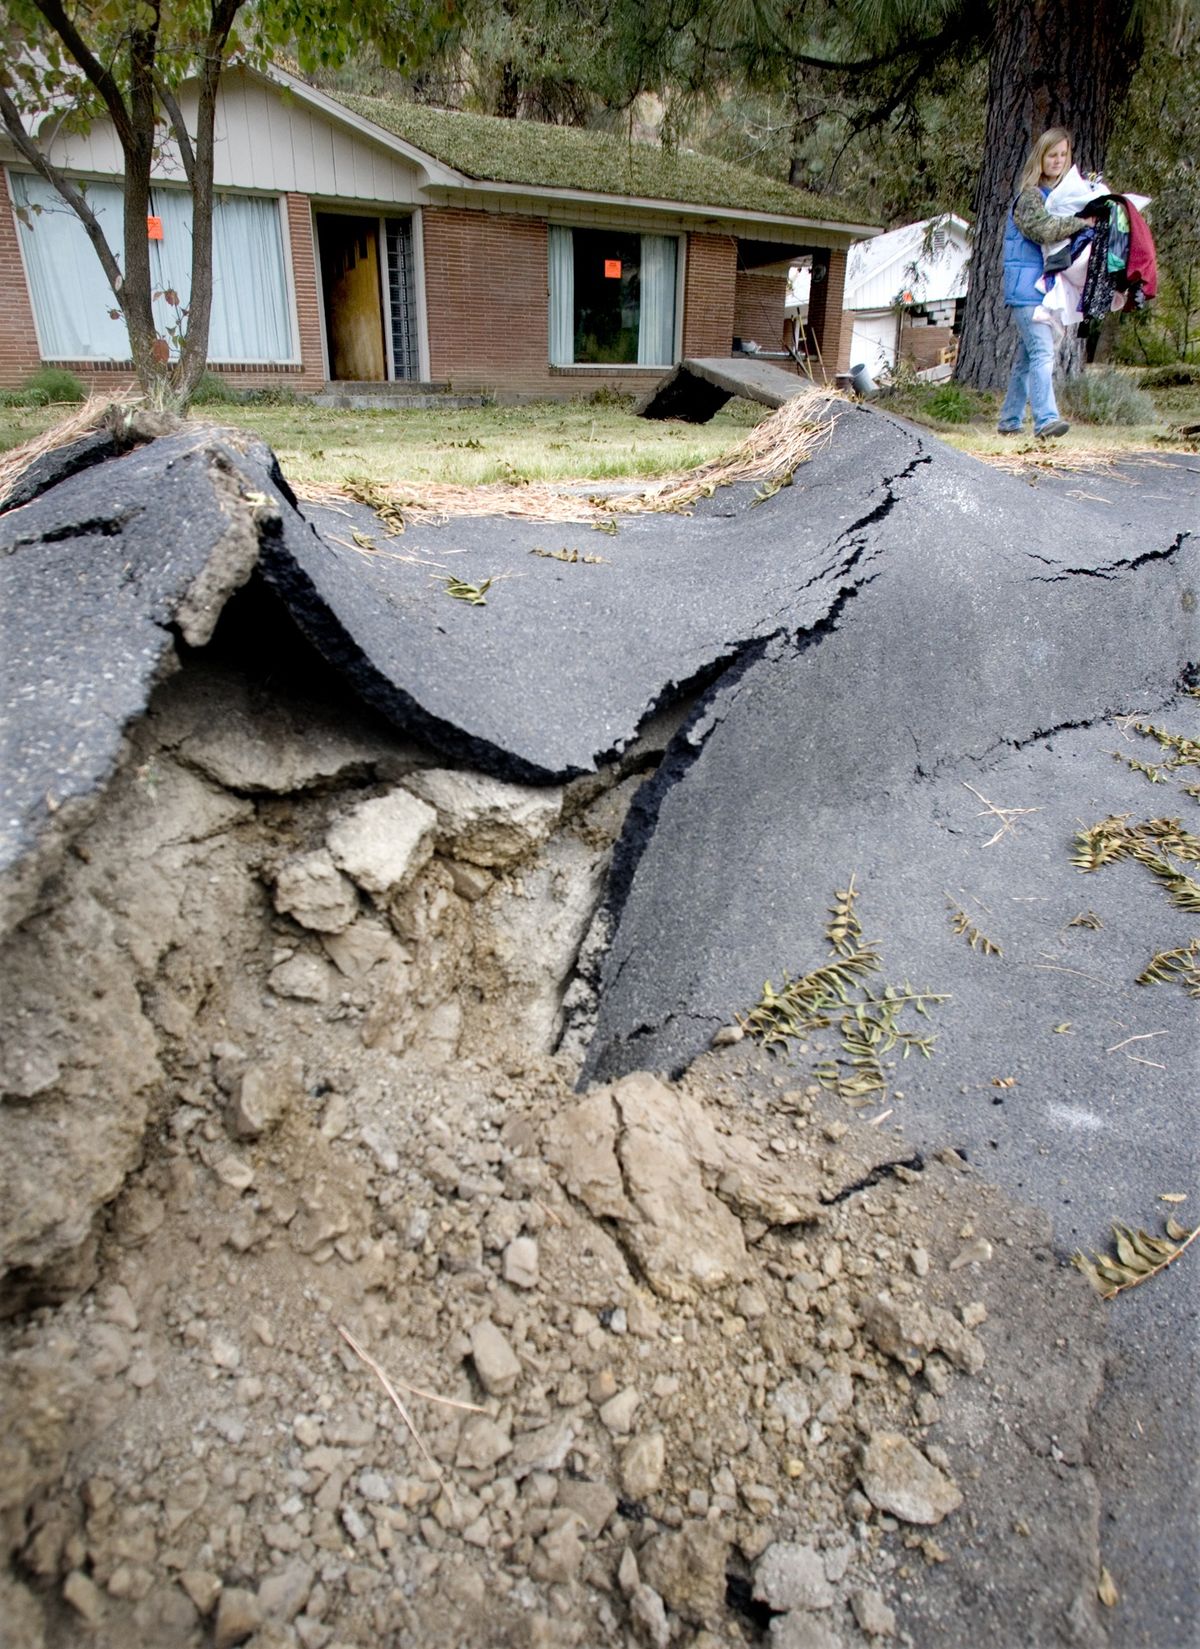 Rebecca Simmons removes personal belongings from her condemned home along Route 410 on Monday Oct. 12, 2009, after a massive landslide took out the state route west of Naches, Wash., over the weekend. Simmons